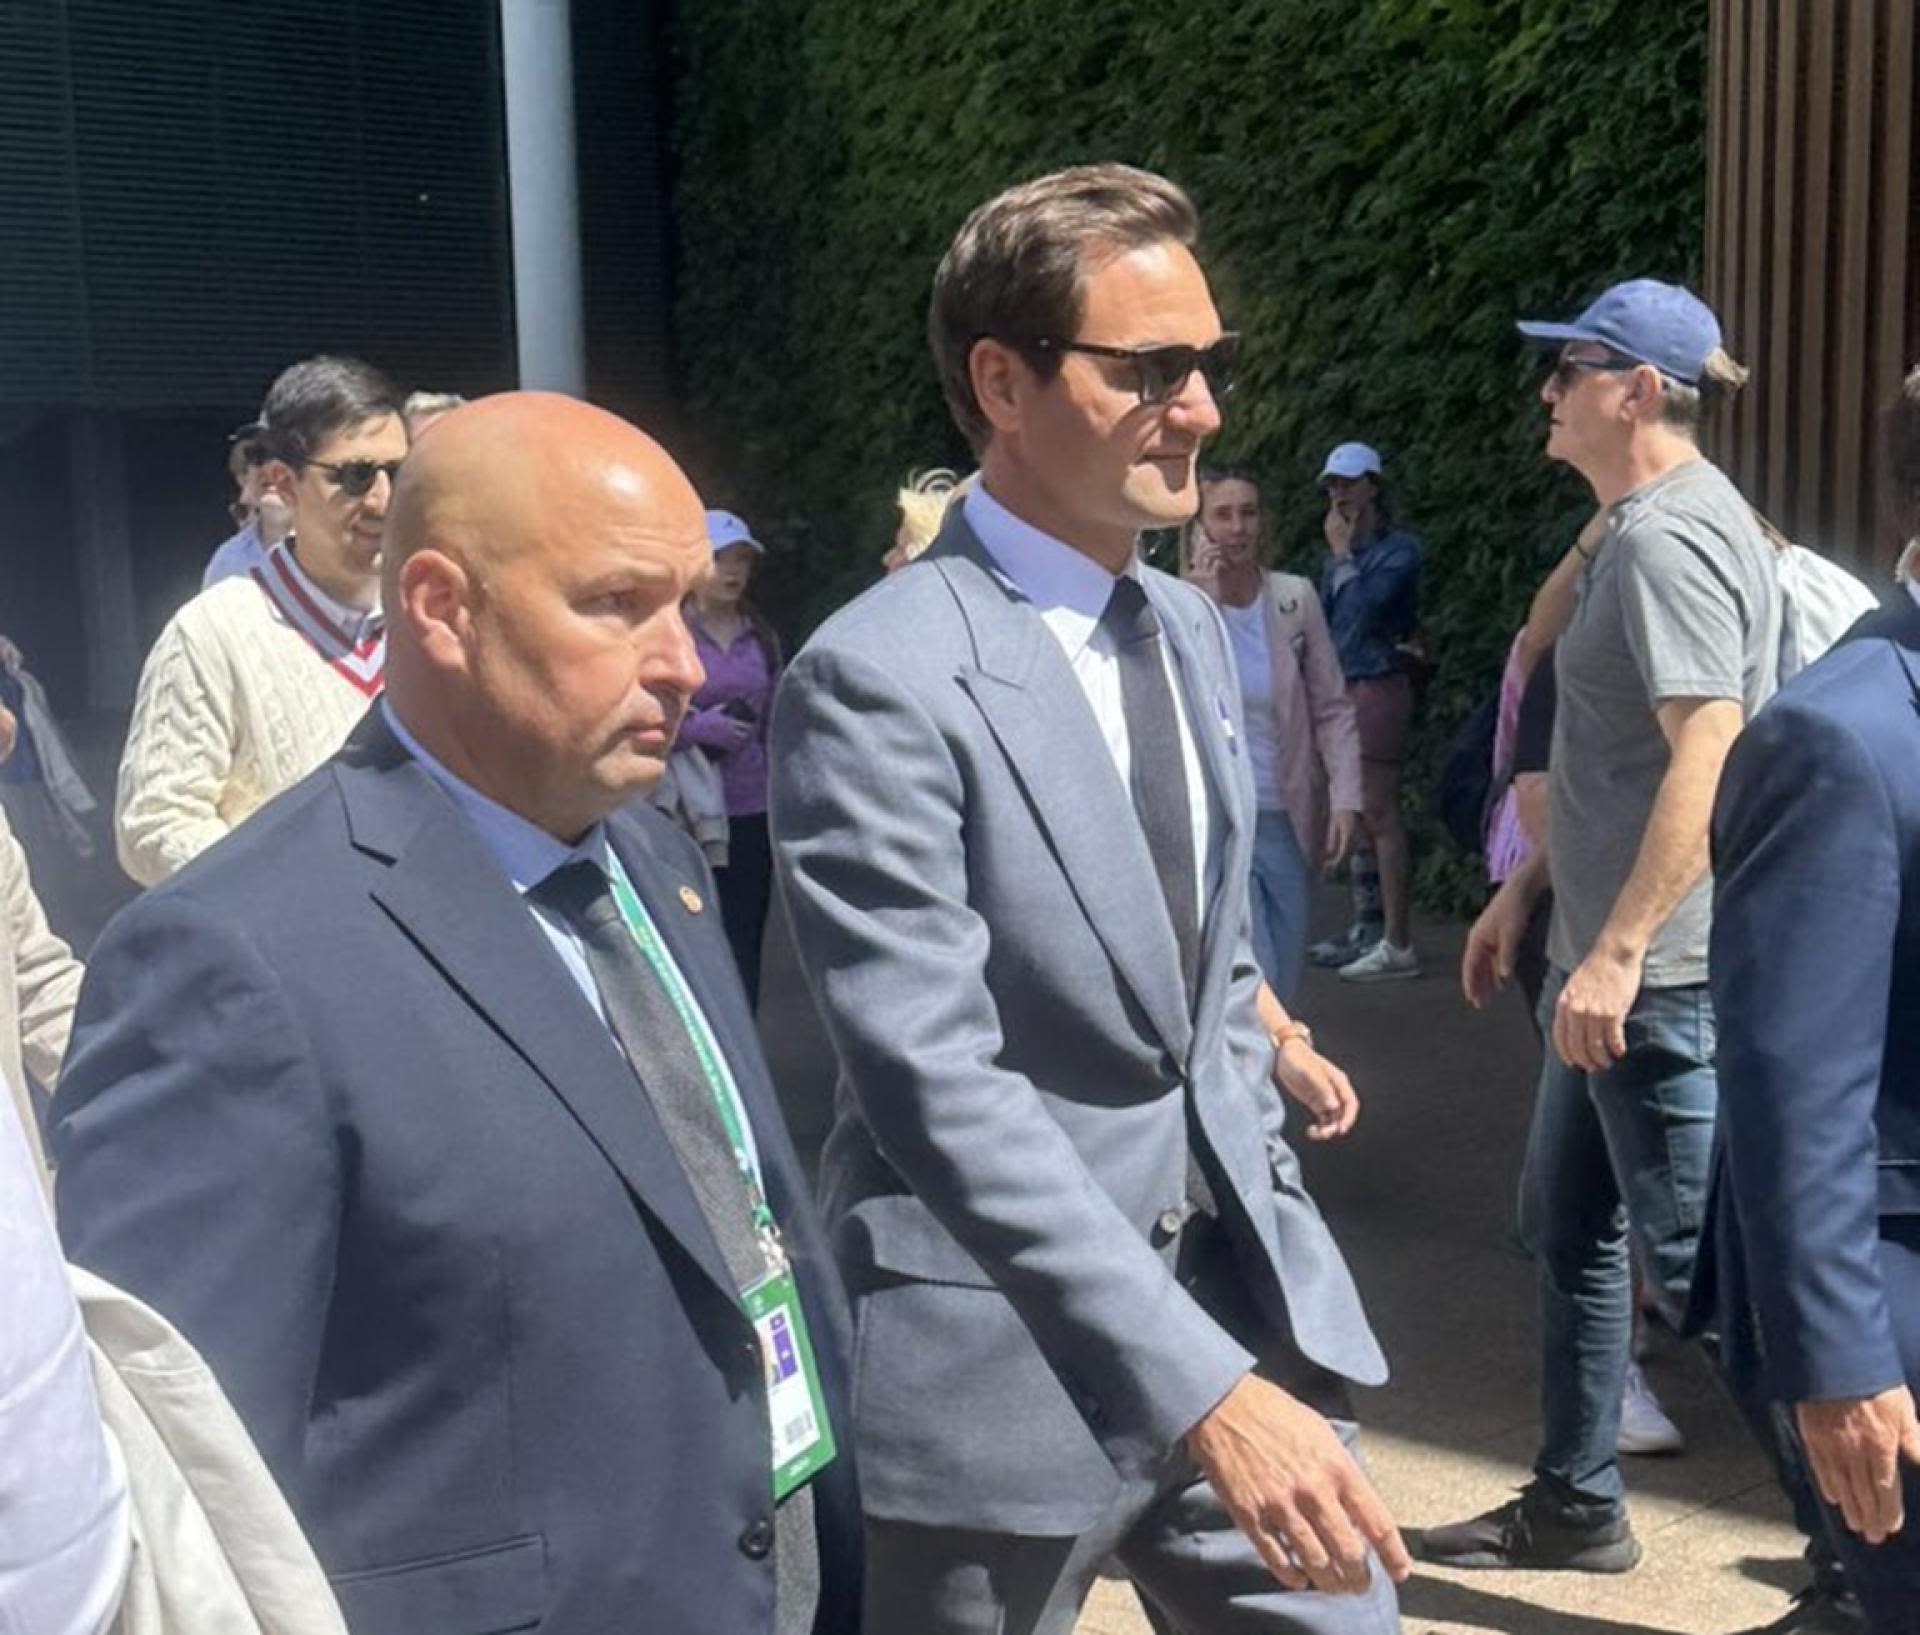 Roger Federer is at Wimbledon to watch Andy Murray's last Championships